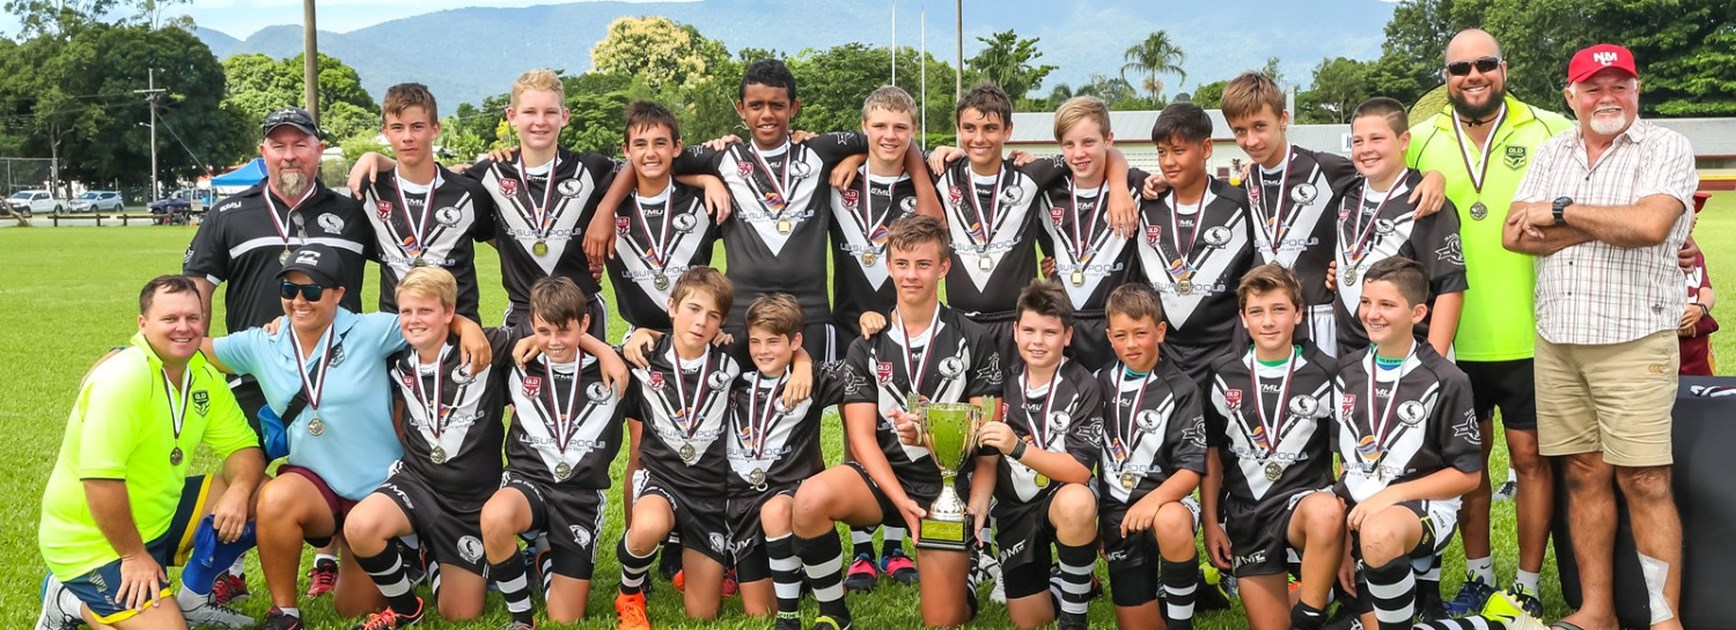 Magpies fly high in Nate Myles Cup